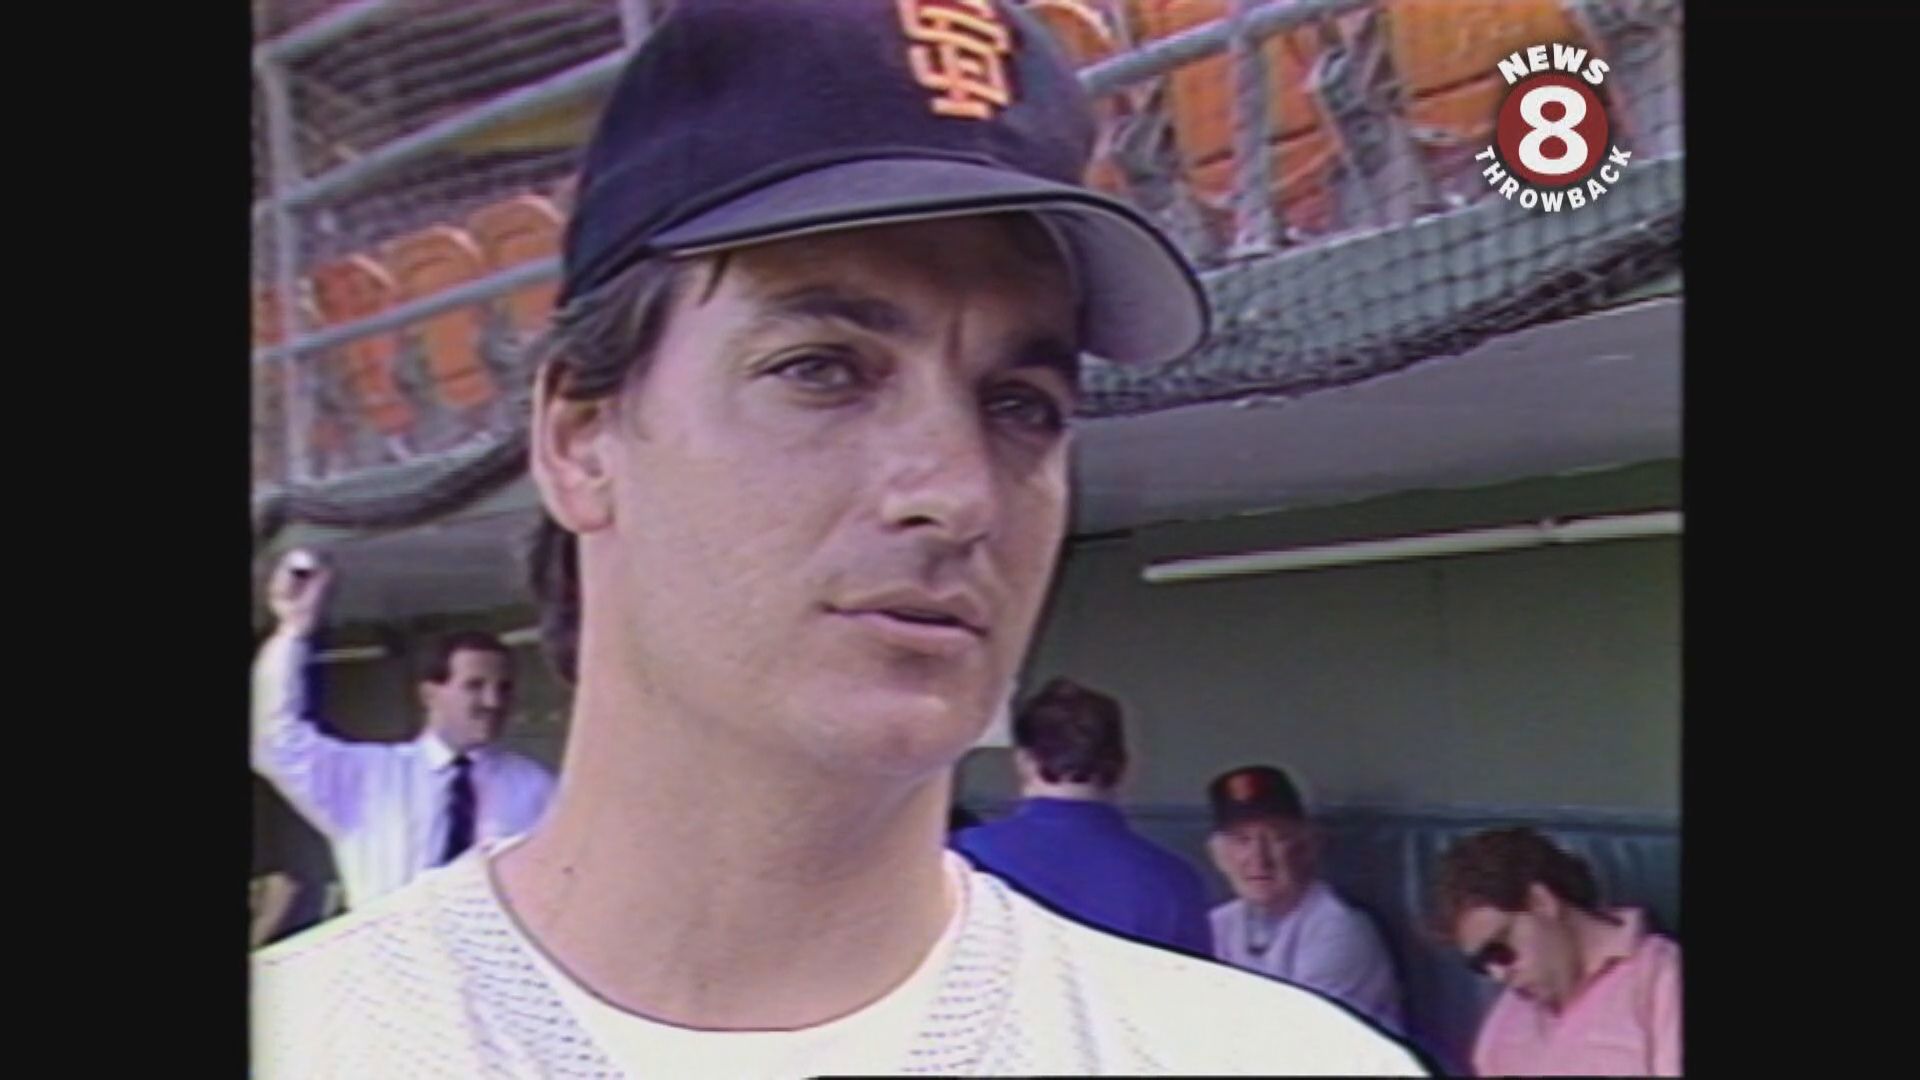 August 10, 1989 Dave Dravecky returns to baseball after a cancerous tumor was removed from his left arm. John Culea reports.